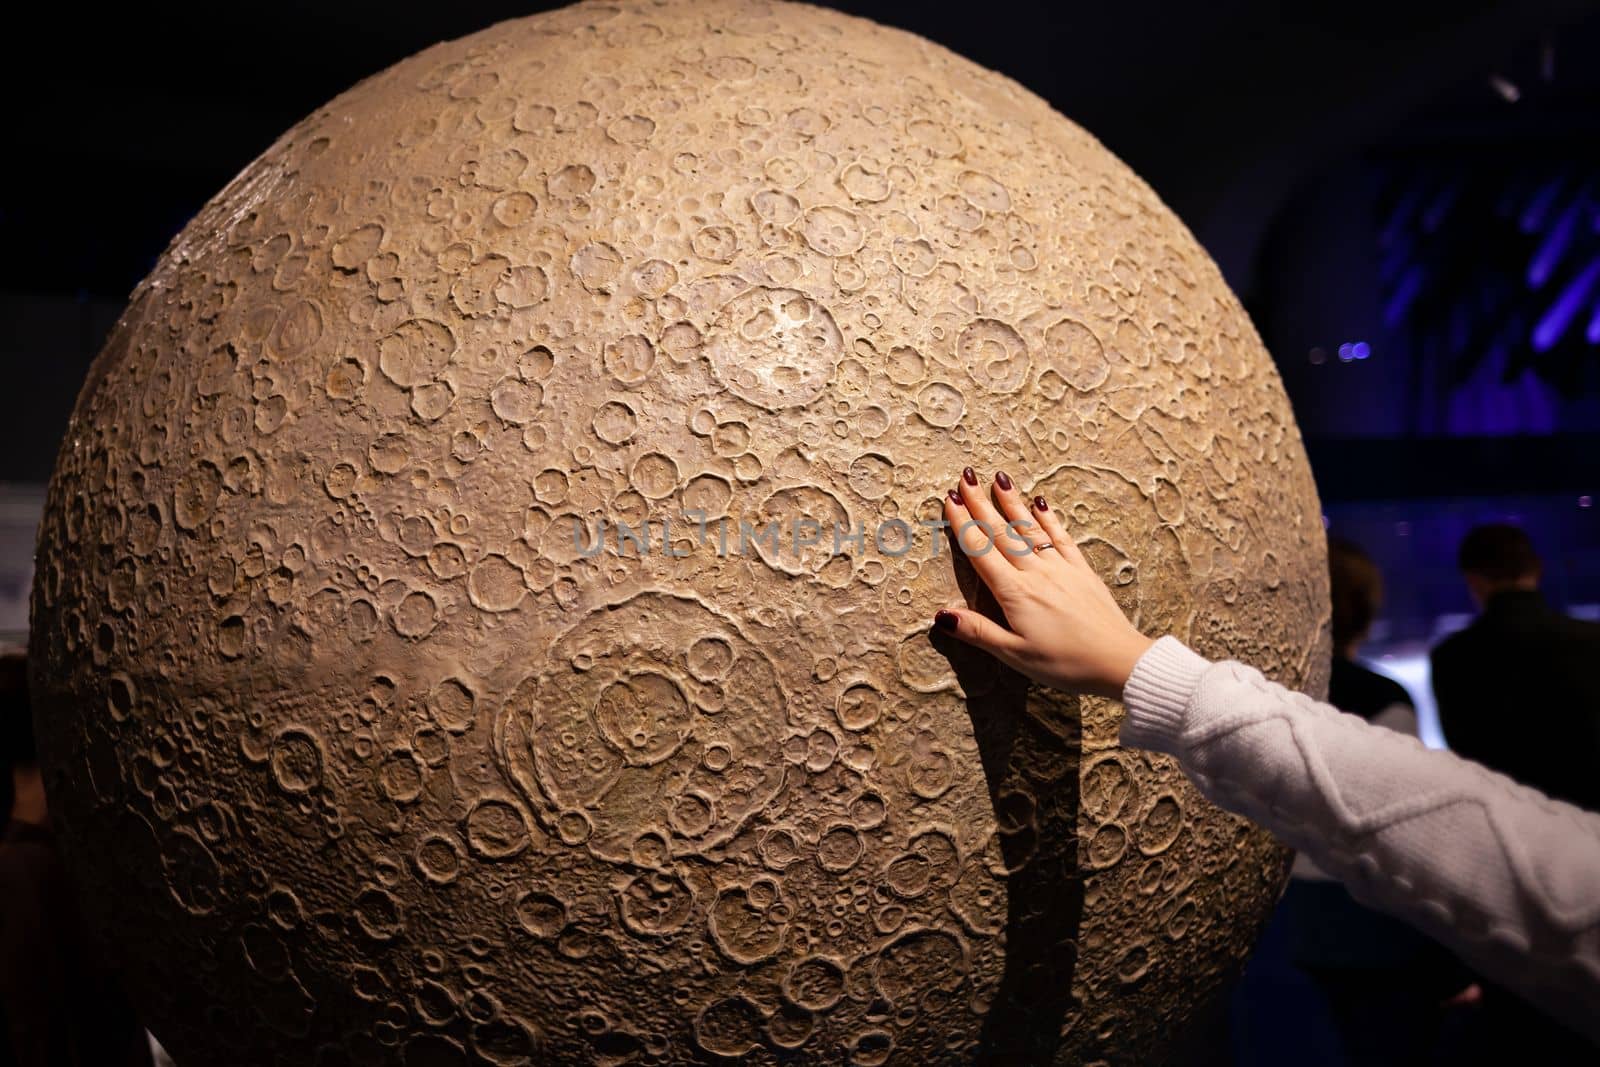 A mock-up of the Moon, the Earth's satellite. The Moscow Planetarium by AnatoliiFoto